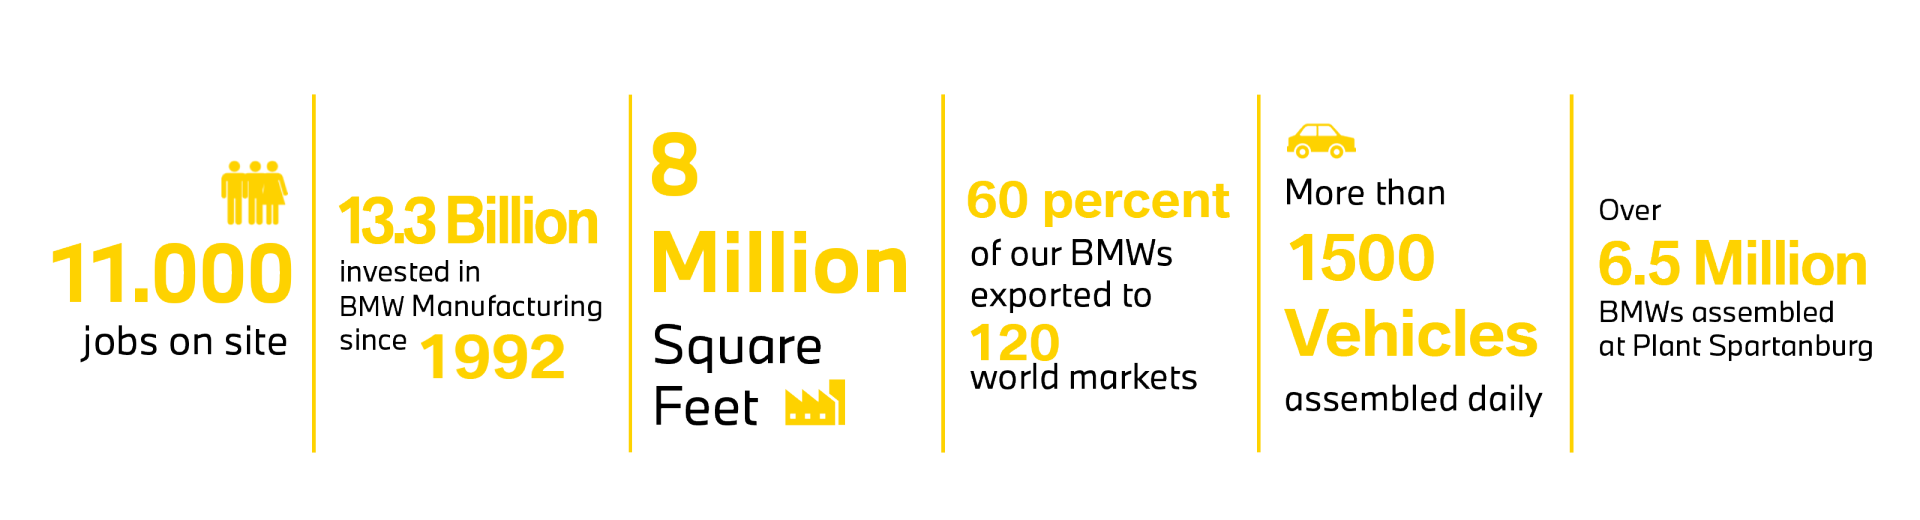 Graphic with Plant Spartanburg stats: 11,000 jobs onsite, 12.4 billion invested since 1992, 8 million square feet, 60 percent of production exported to 120 world markets, more than 1500 vehicles produced daily, over 6 million BMW's produced. 